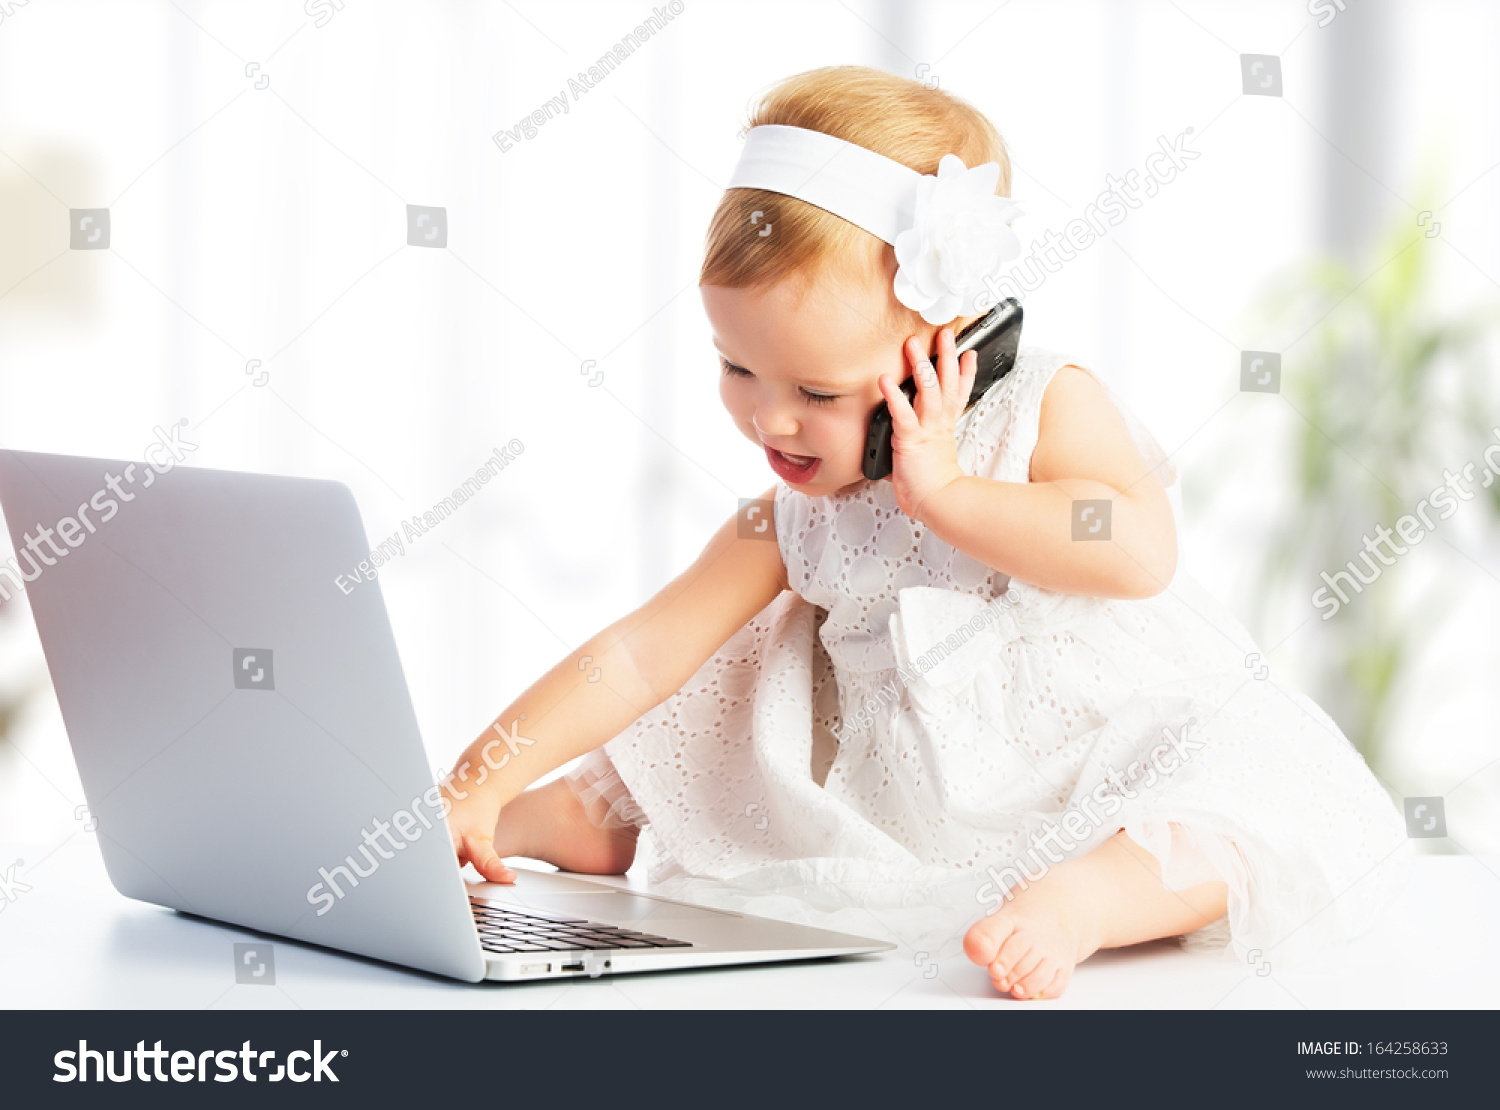 baby on a computer and phone